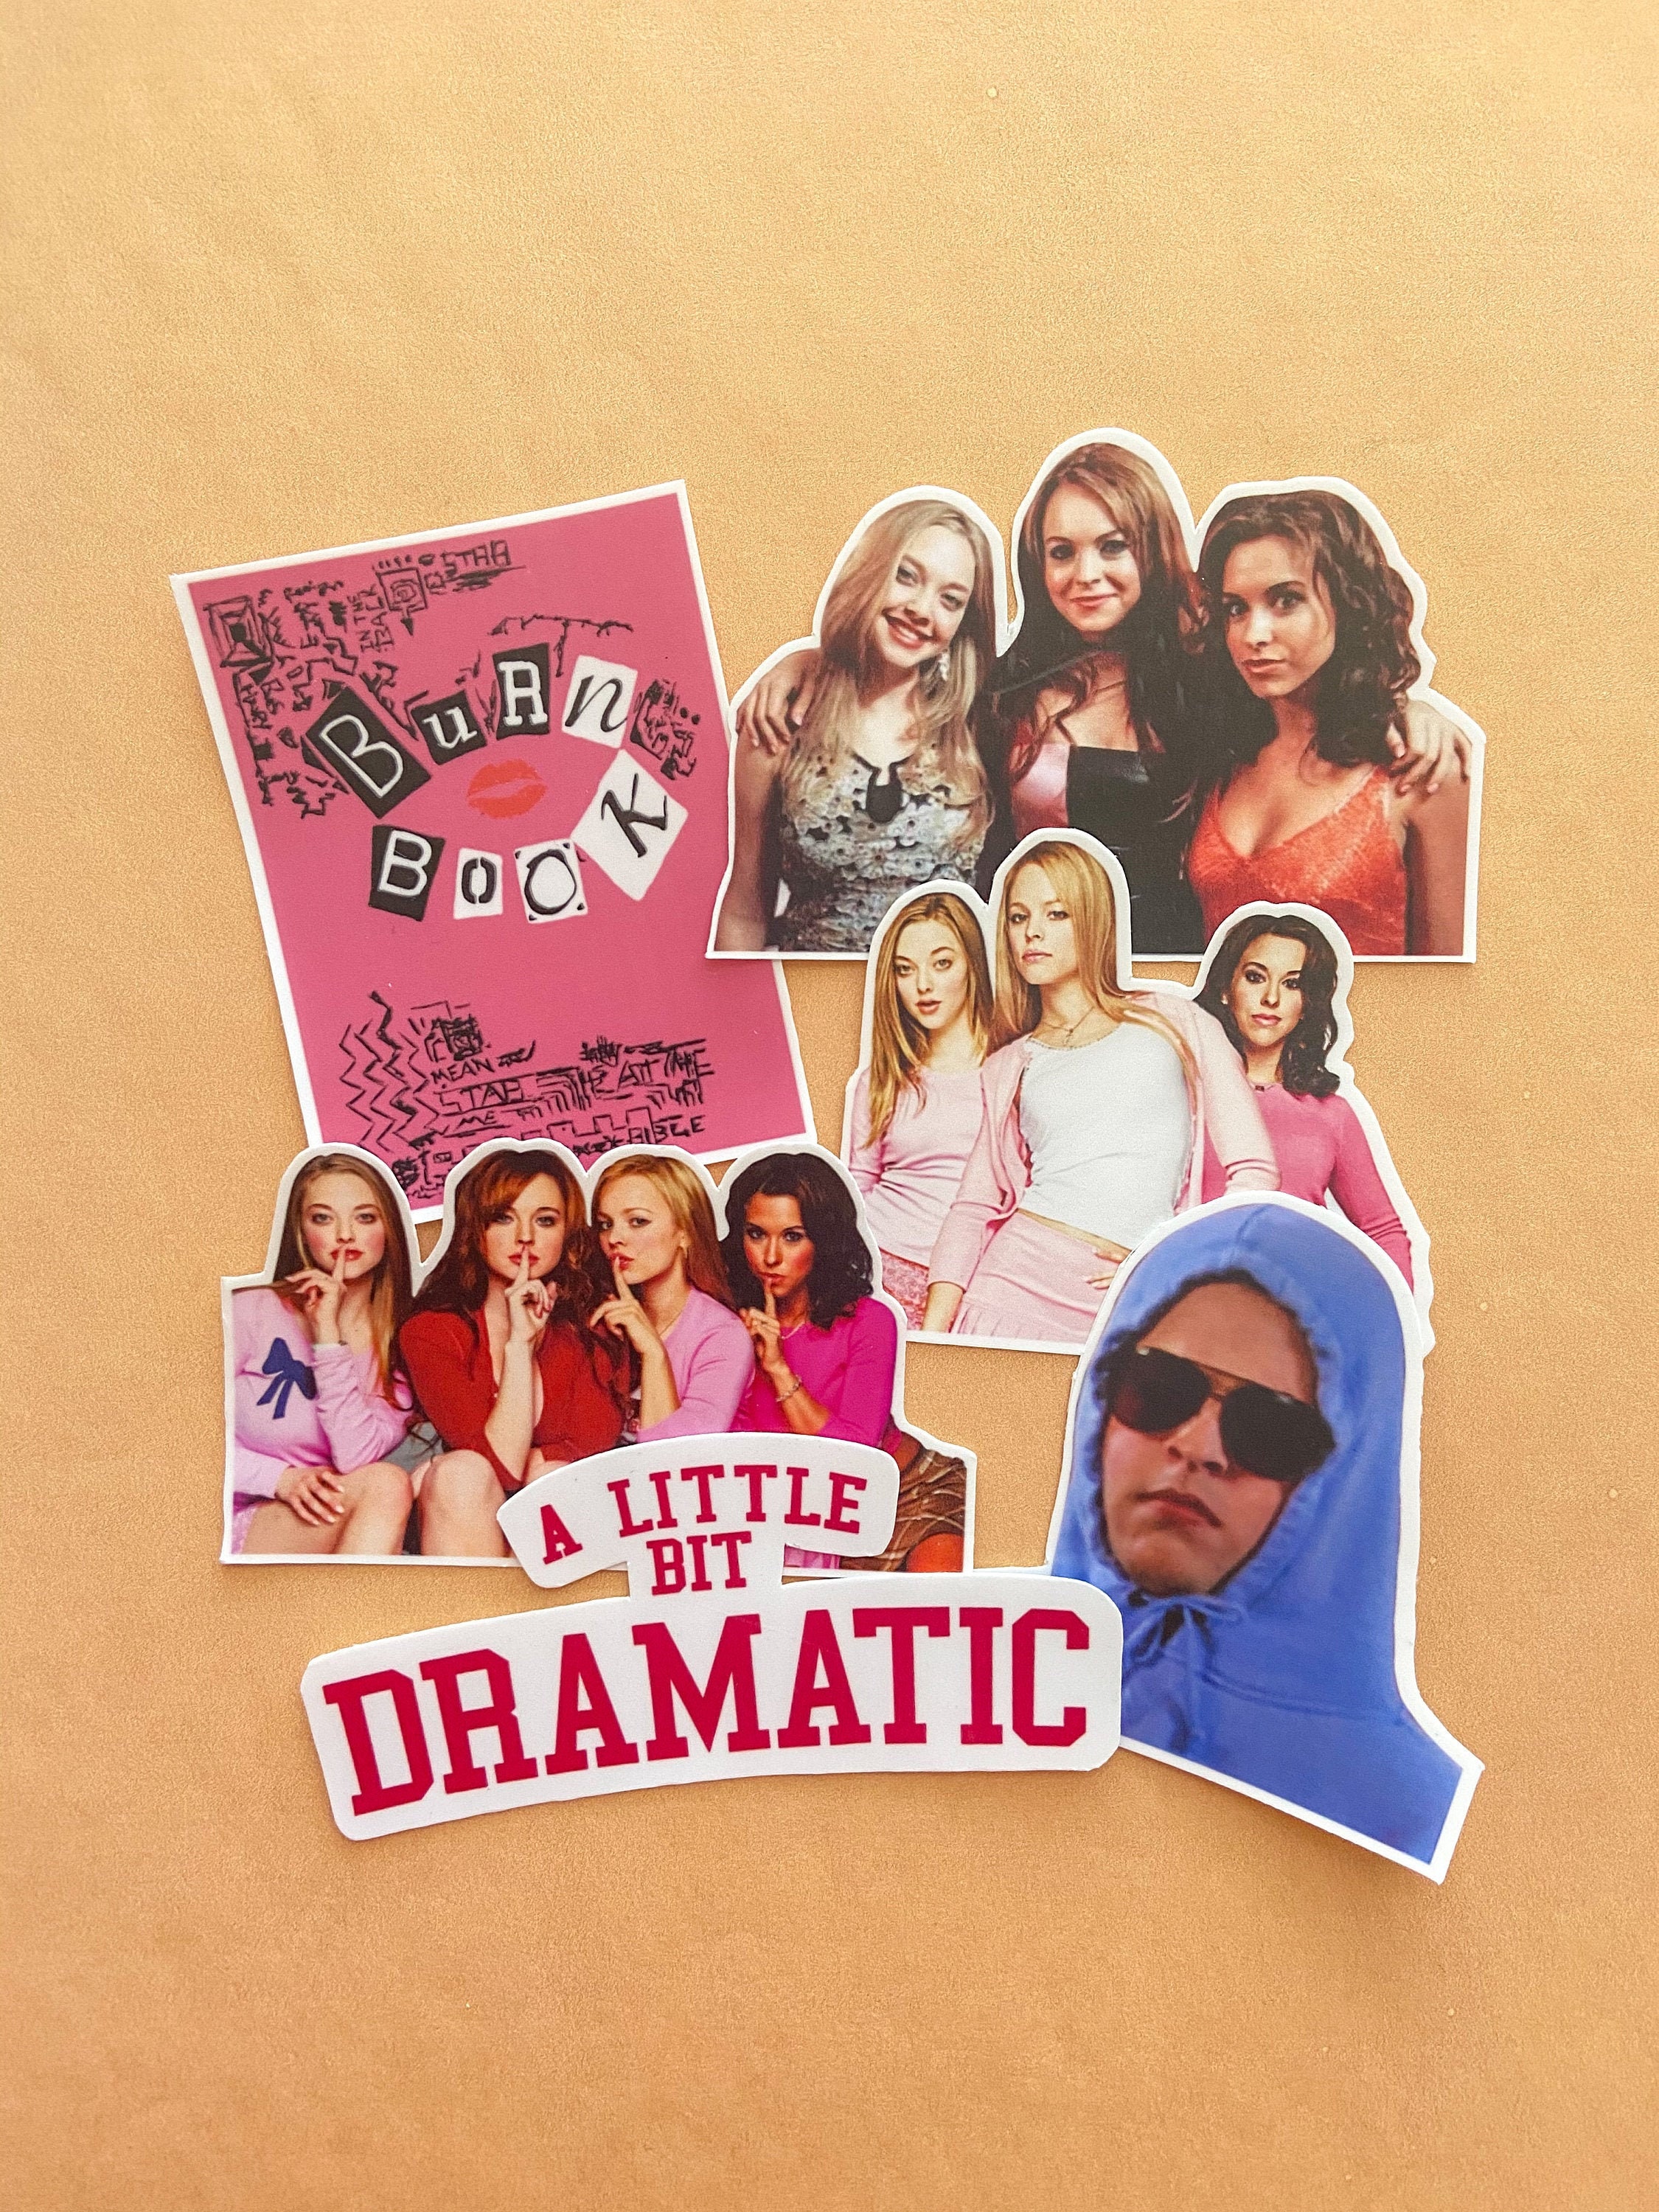 Mean Girls Gifts & Merchandise for Sale  Cool stickers, Preppy stickers, Mean  girls